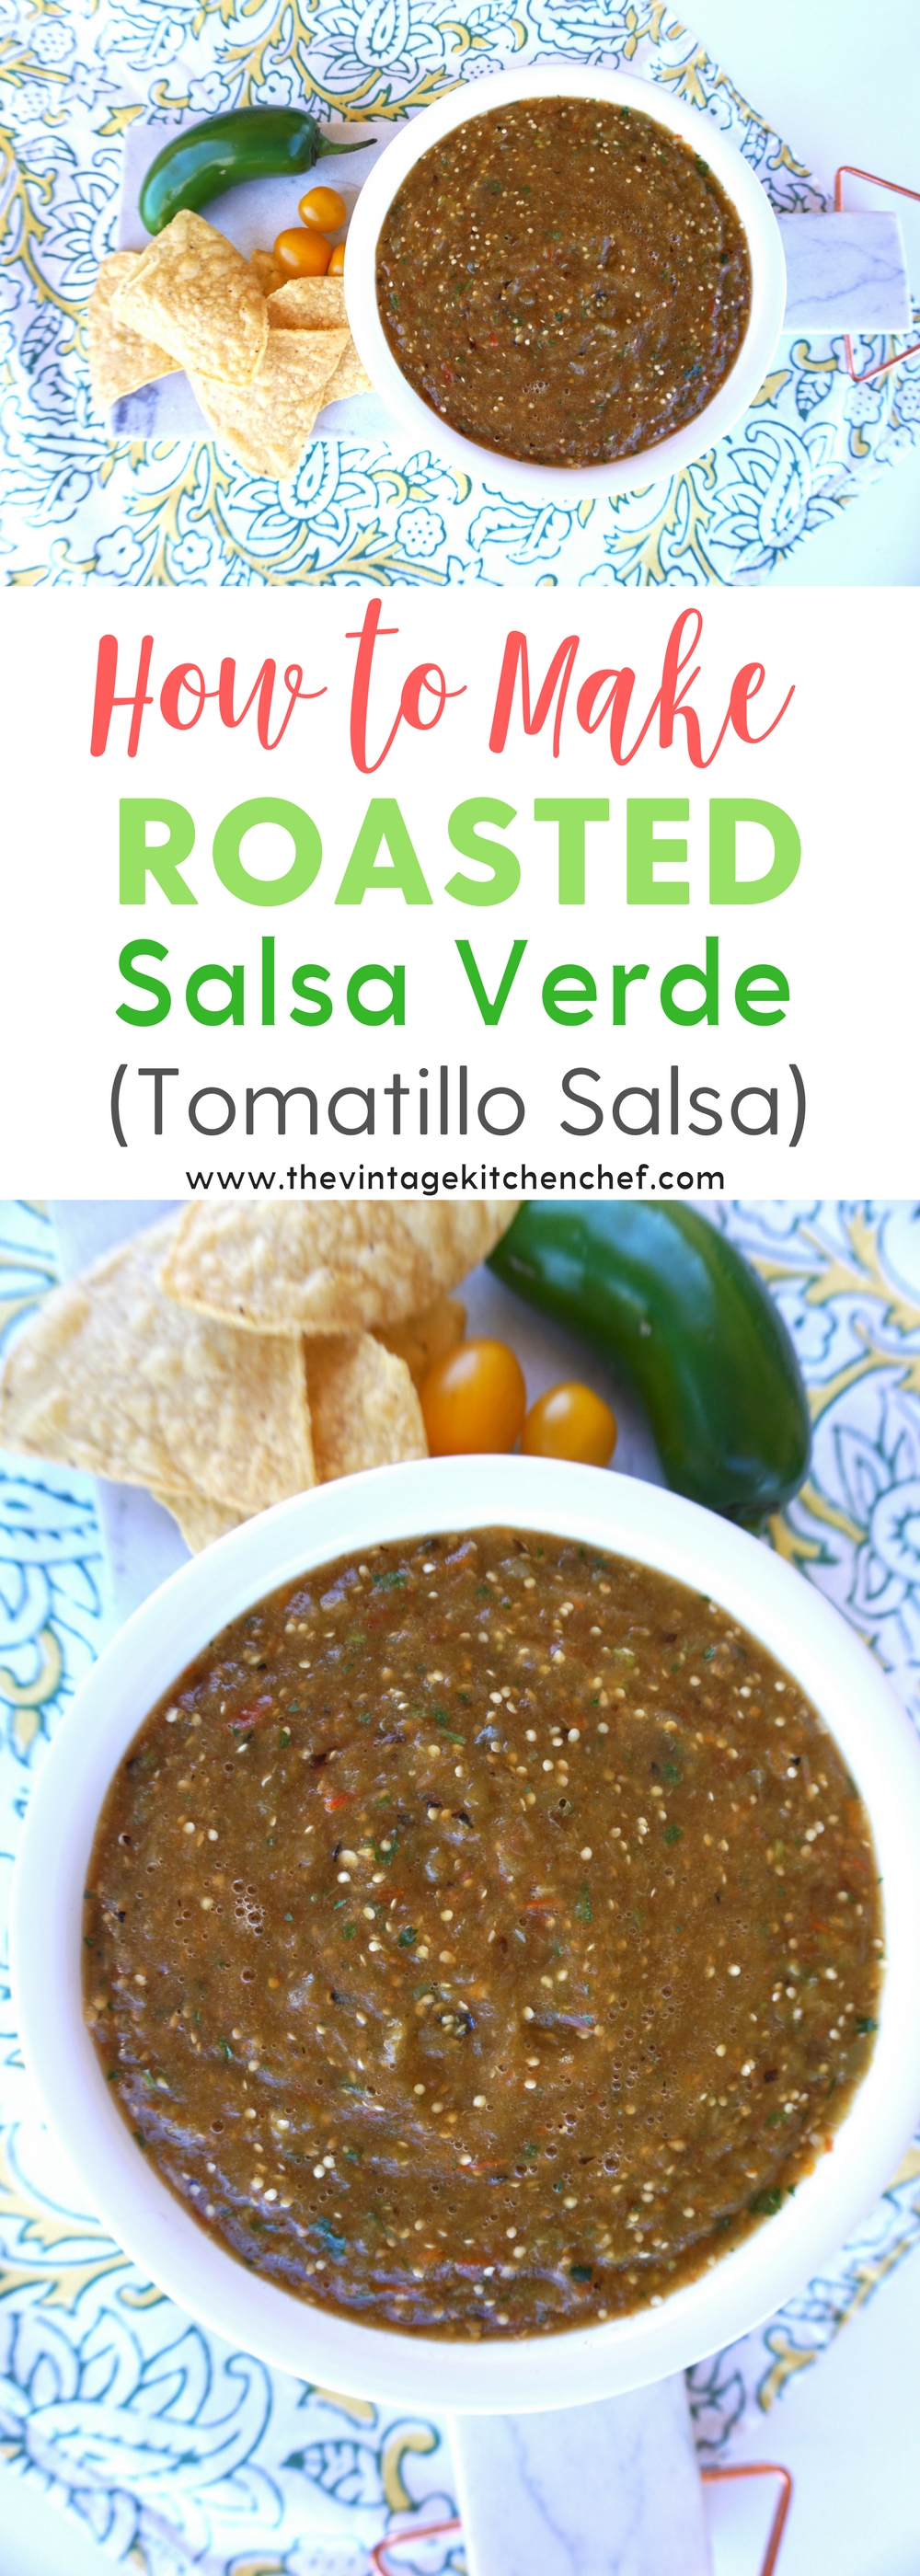 Roasted Salsa Verde is a treat for your tastebuds! It's a little chunky and tangy with just the right amount of spiciness. Enjoy it on tacos or with chips!